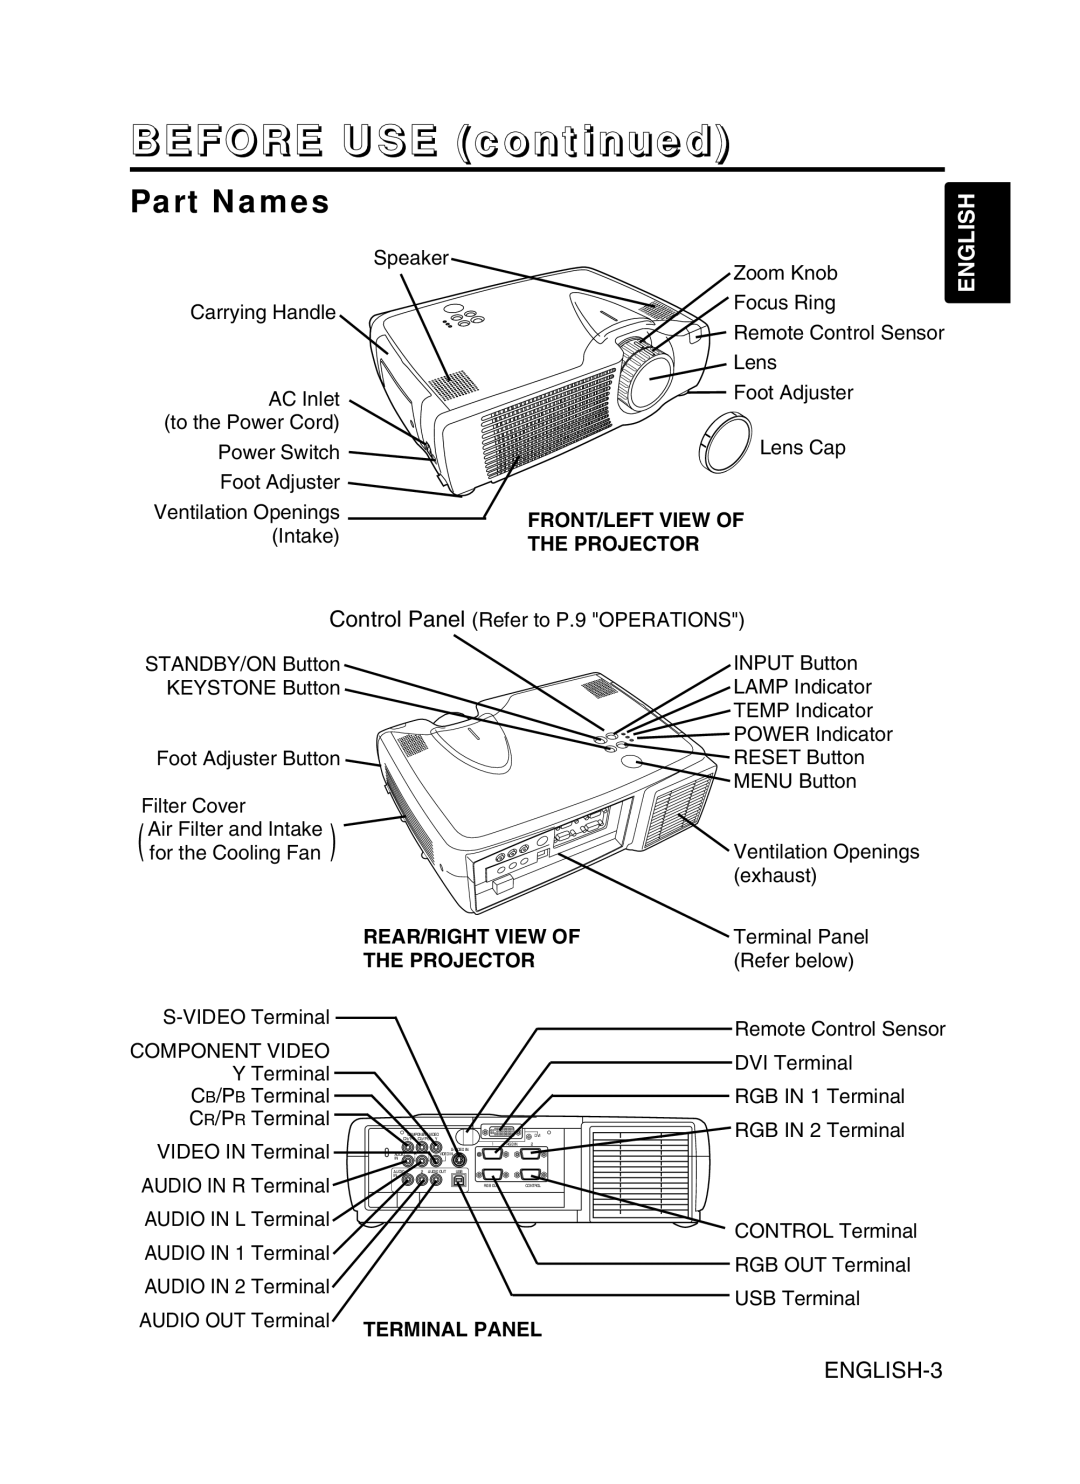 BOXLIGHT CP-775I user manual BEFORE USE continued, Part Names, ENGLISH-3, English 